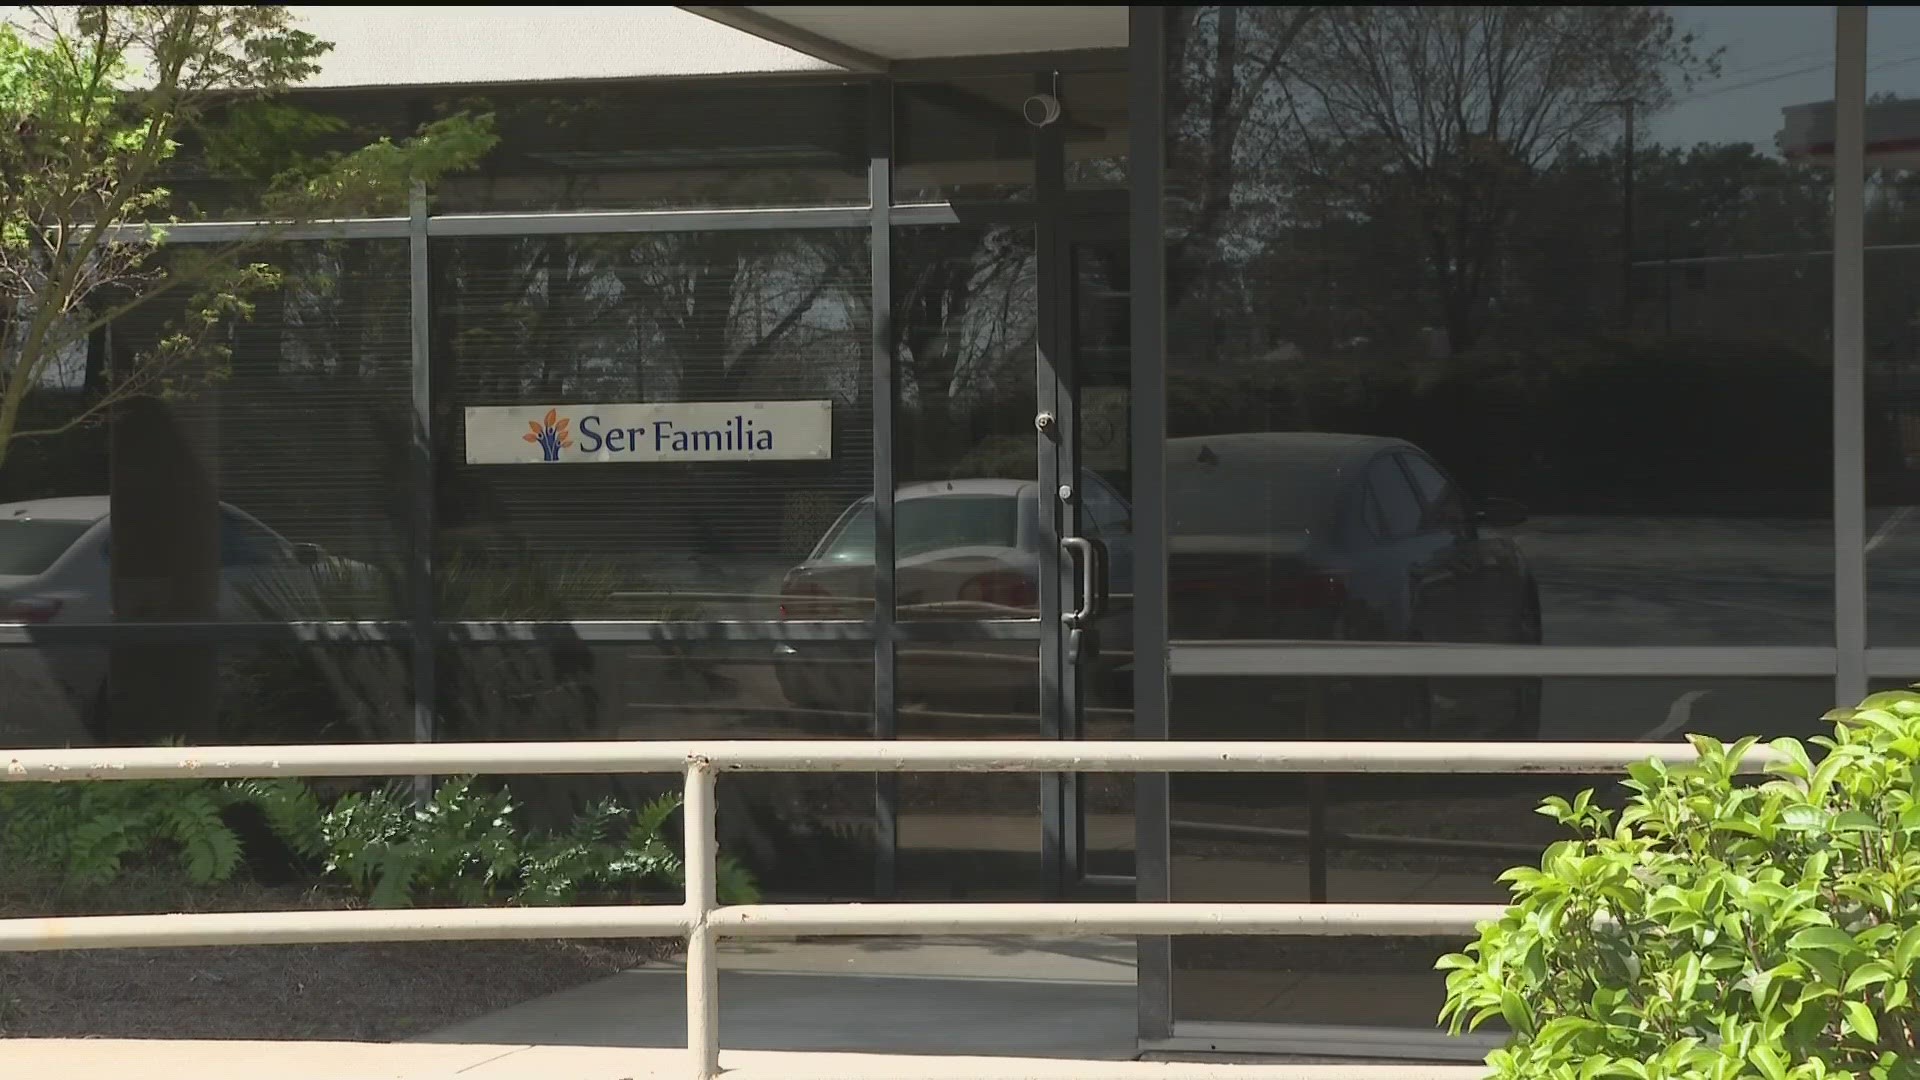 Ser Familia has centers in heavily-populated Hispanic counties and a few months ago opened a new center it opened a new center in Clayton County.